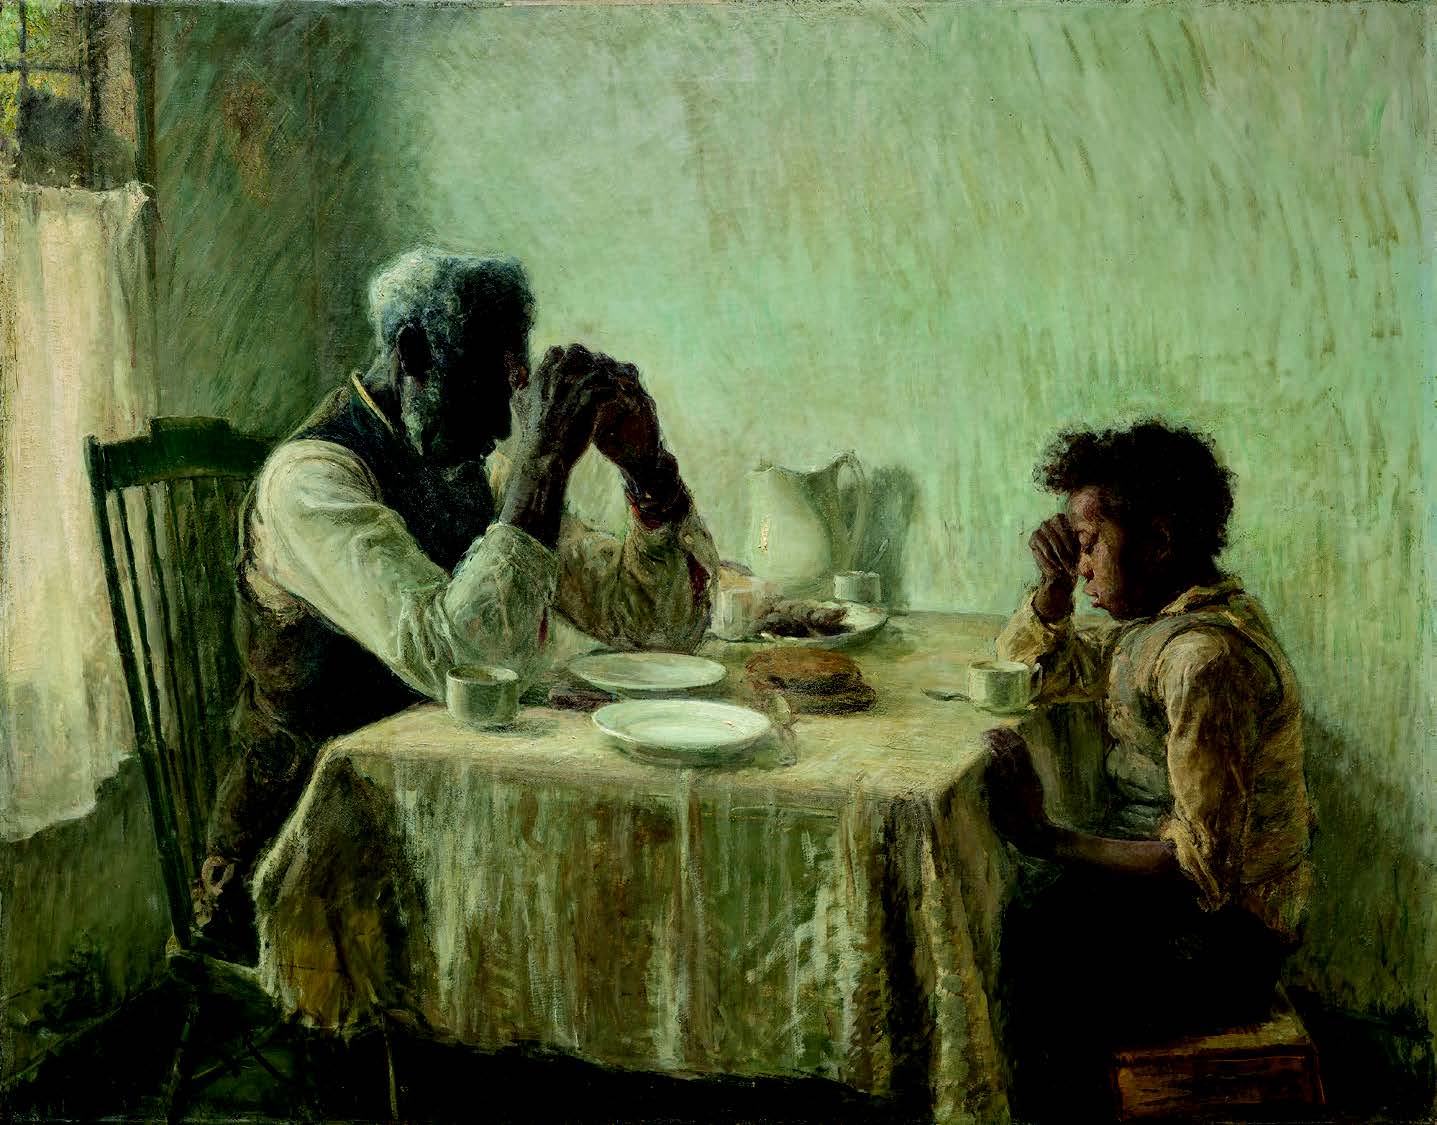 Henry Ossawa Tanner, American, 1859 - 1937, The Thankful Poor, 1894, oil on canvas